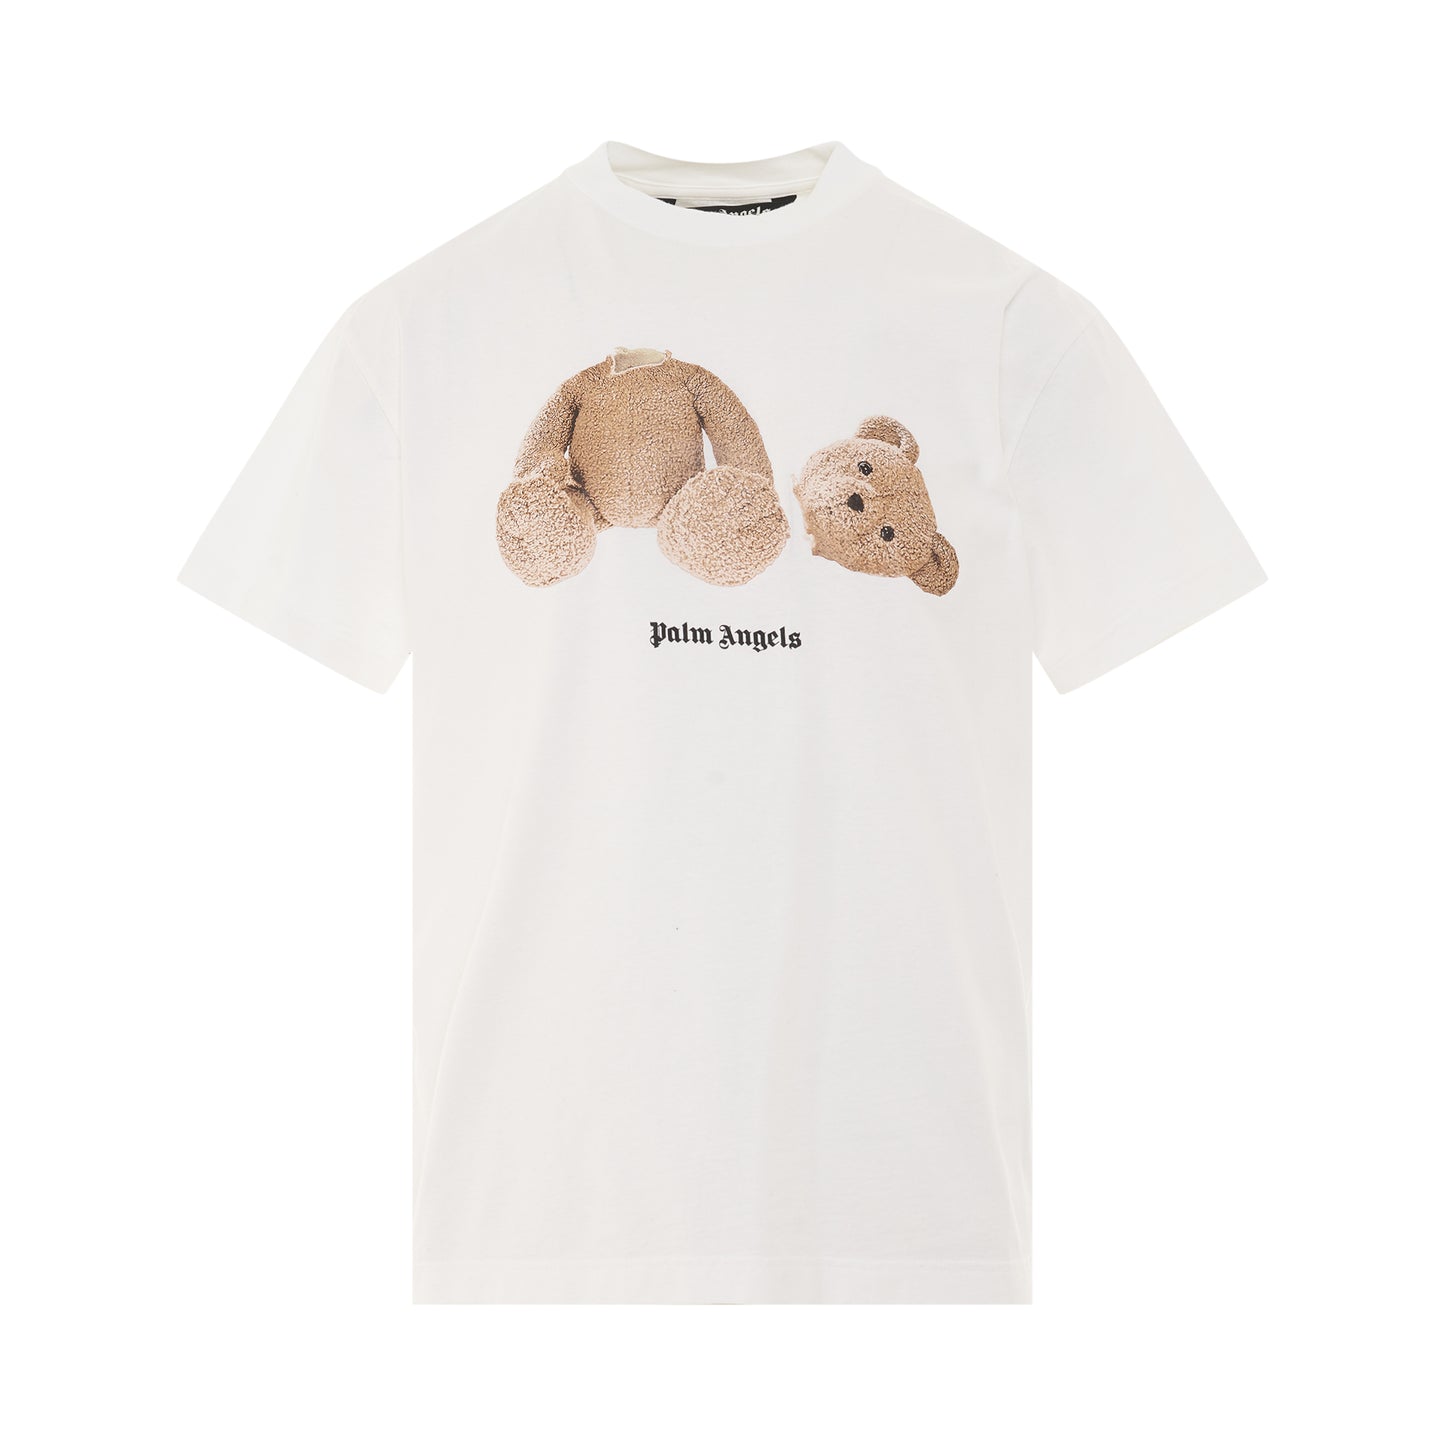 PA Bear Classic T-Shirt in White/Brown